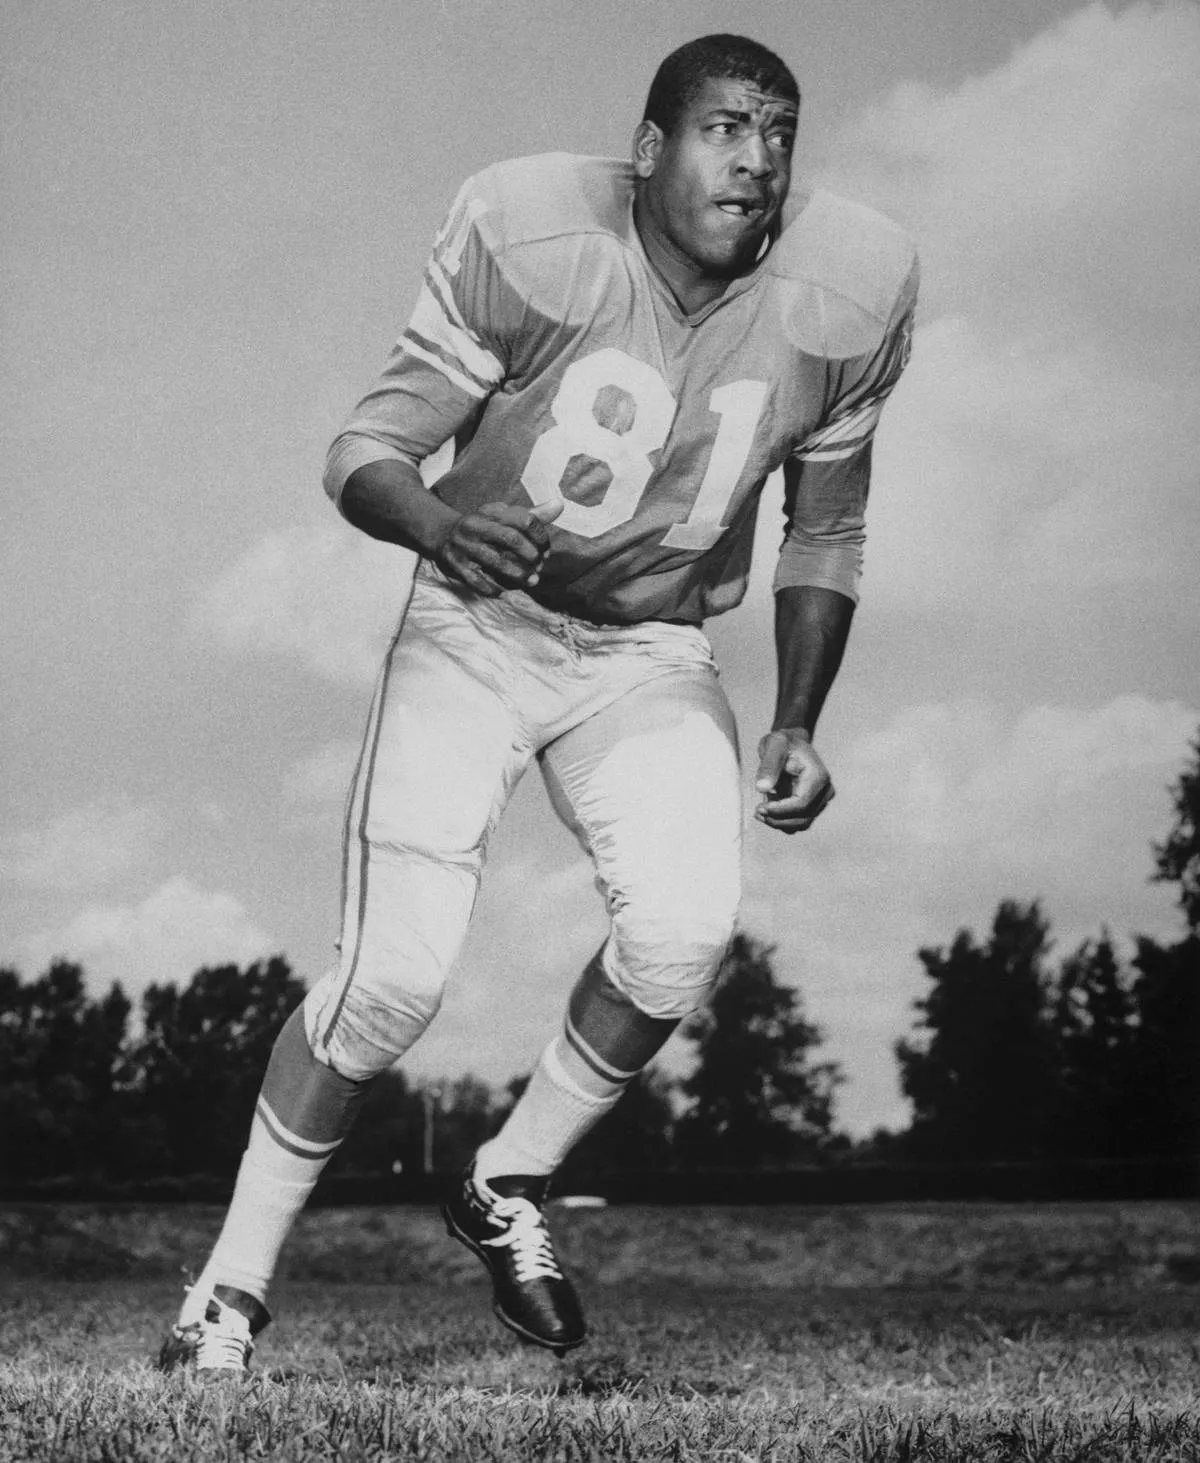 The Detroit Lions of the National football League cut three players on September 7th, including veteran defensive back Dick (Night Train) Lane, shown in this 1964 file photo